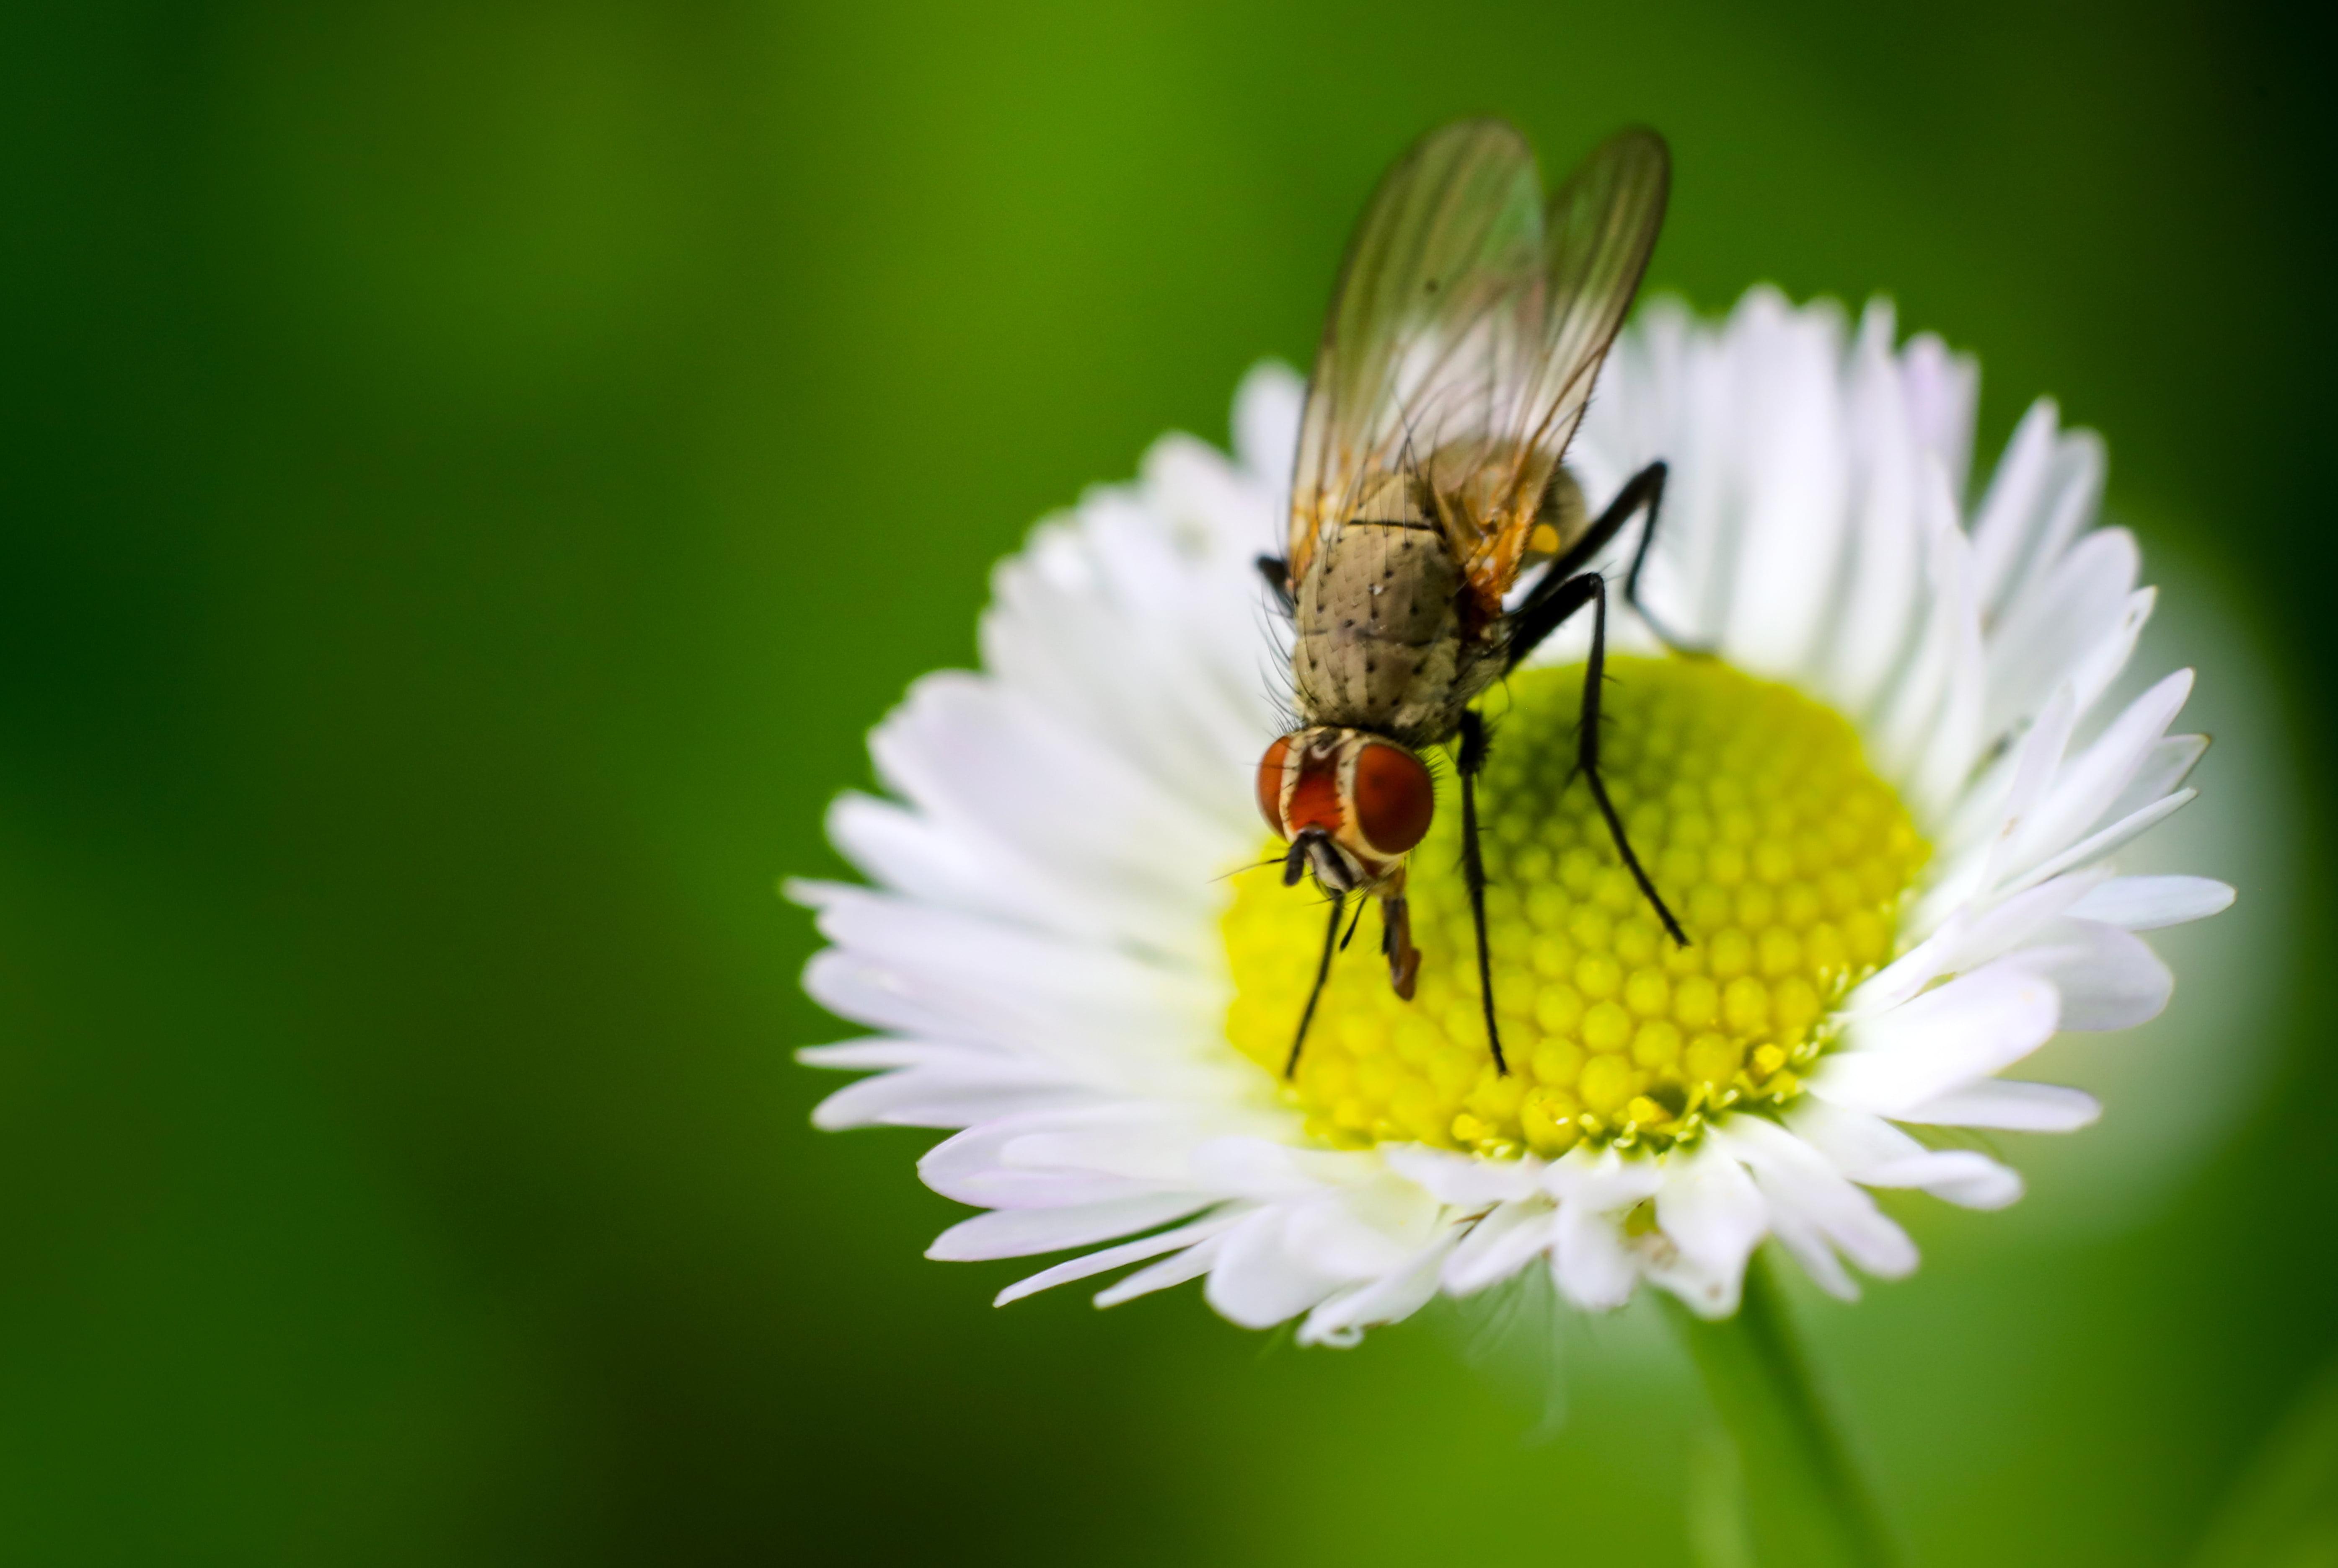 Common Housefly On A White Petaled Flower Macro Photo HD